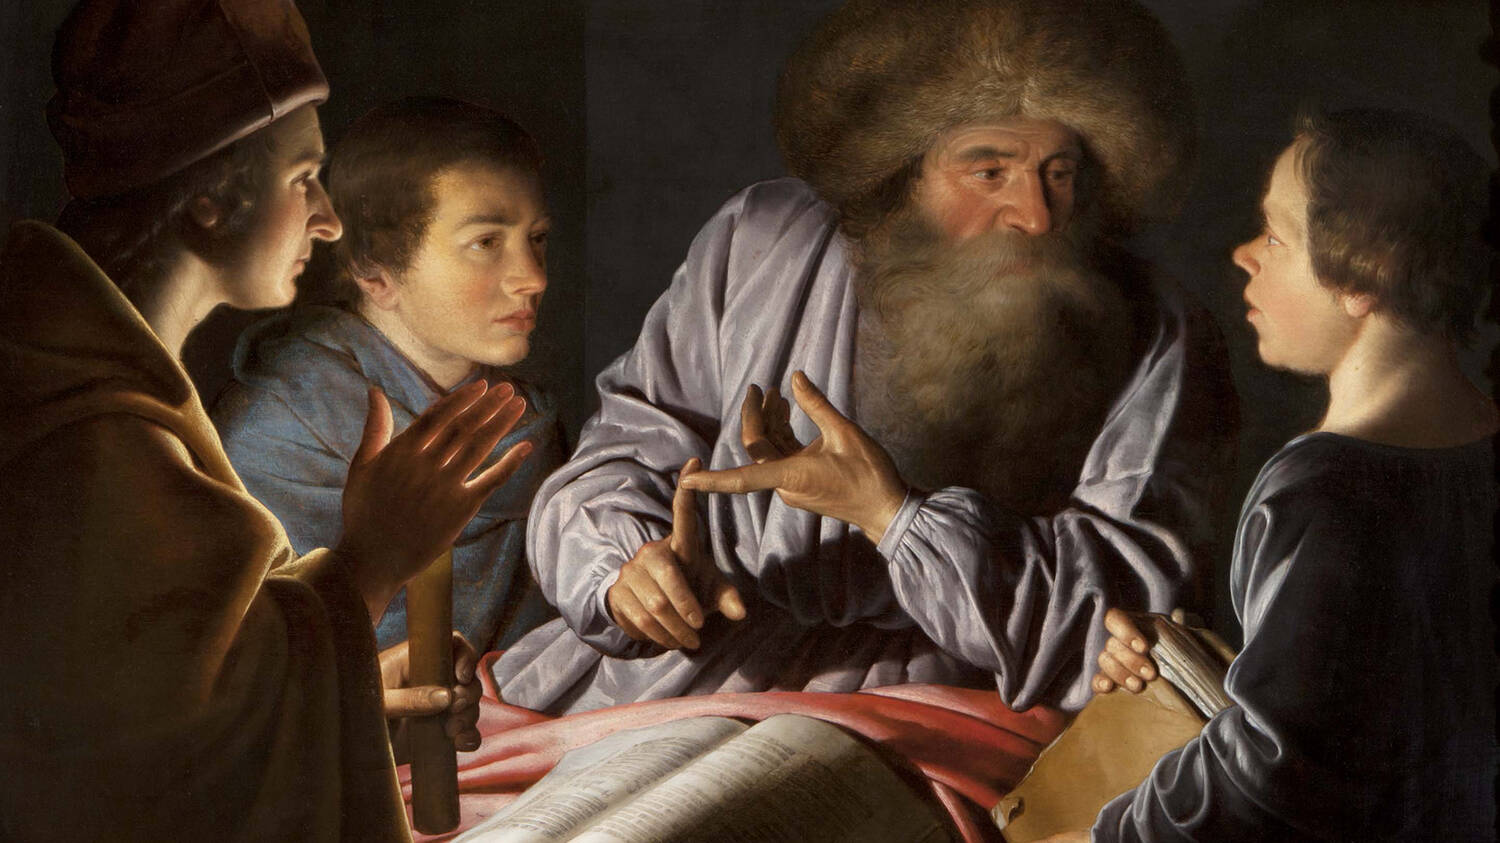 A painting of a older man (with a beard and immense furry hat) sitting round a table with his younger pupils. They all look at him. An unseen light source seems to illuminate all their faces.